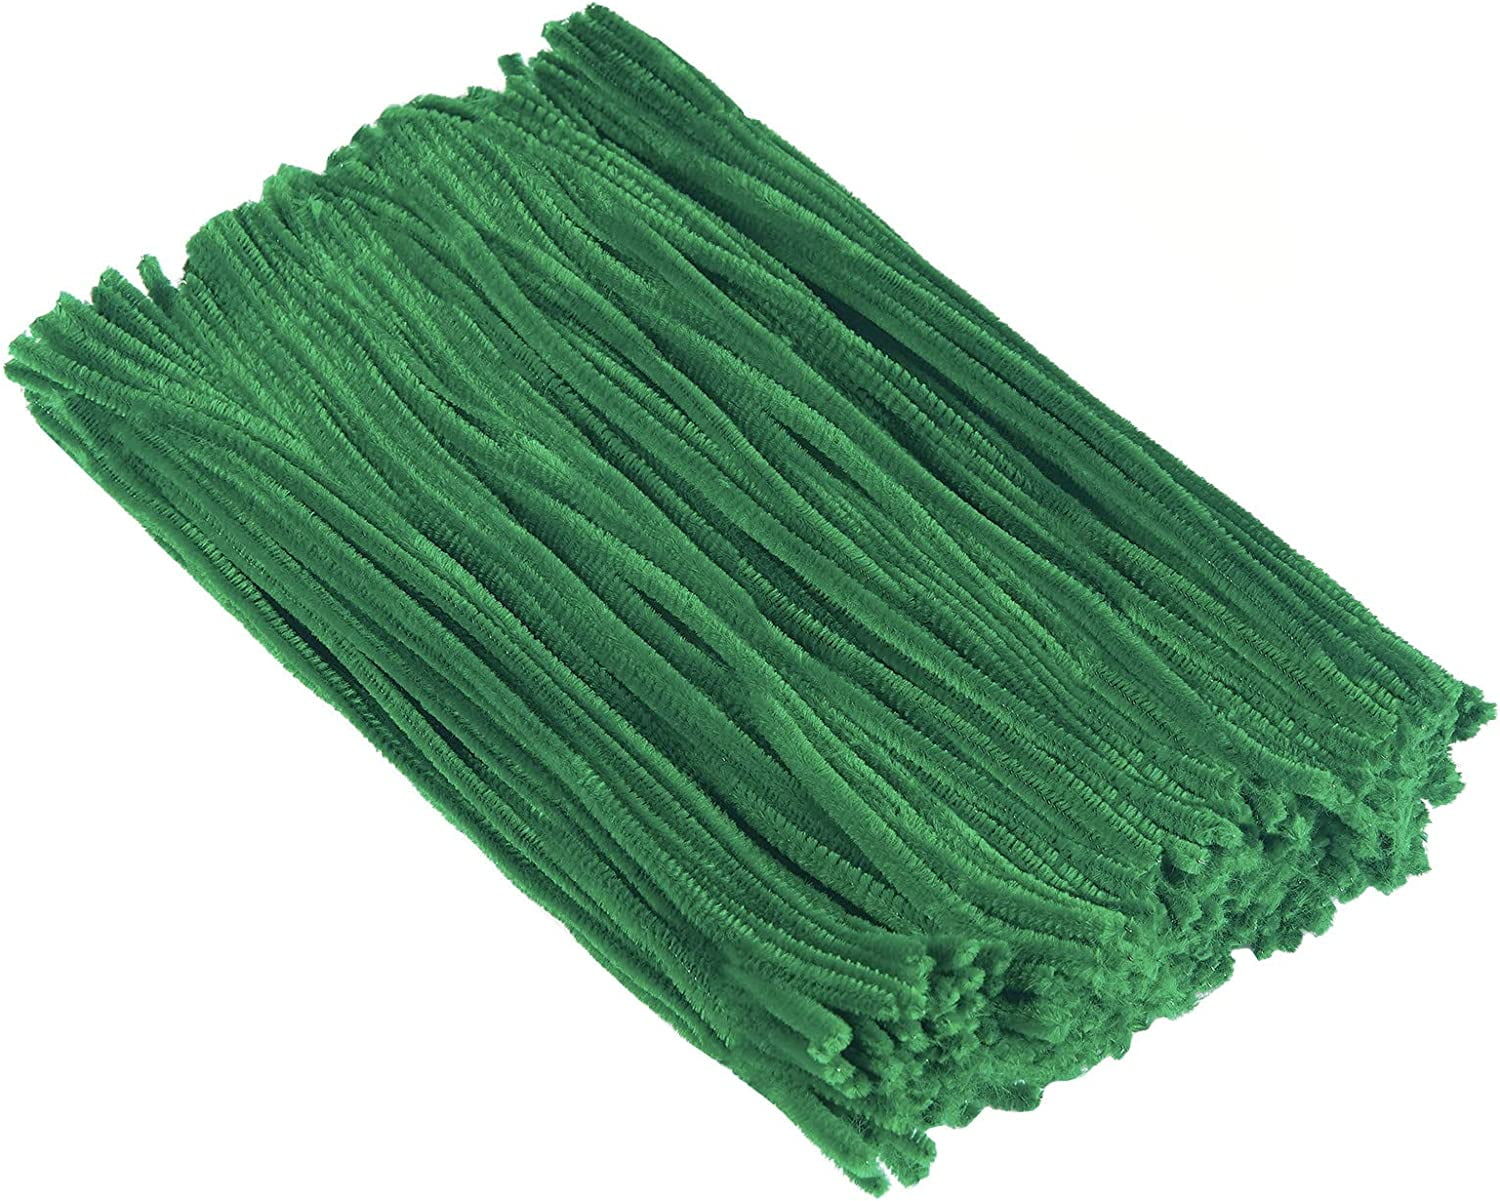 Green Craft Pipe Cleaners for sale